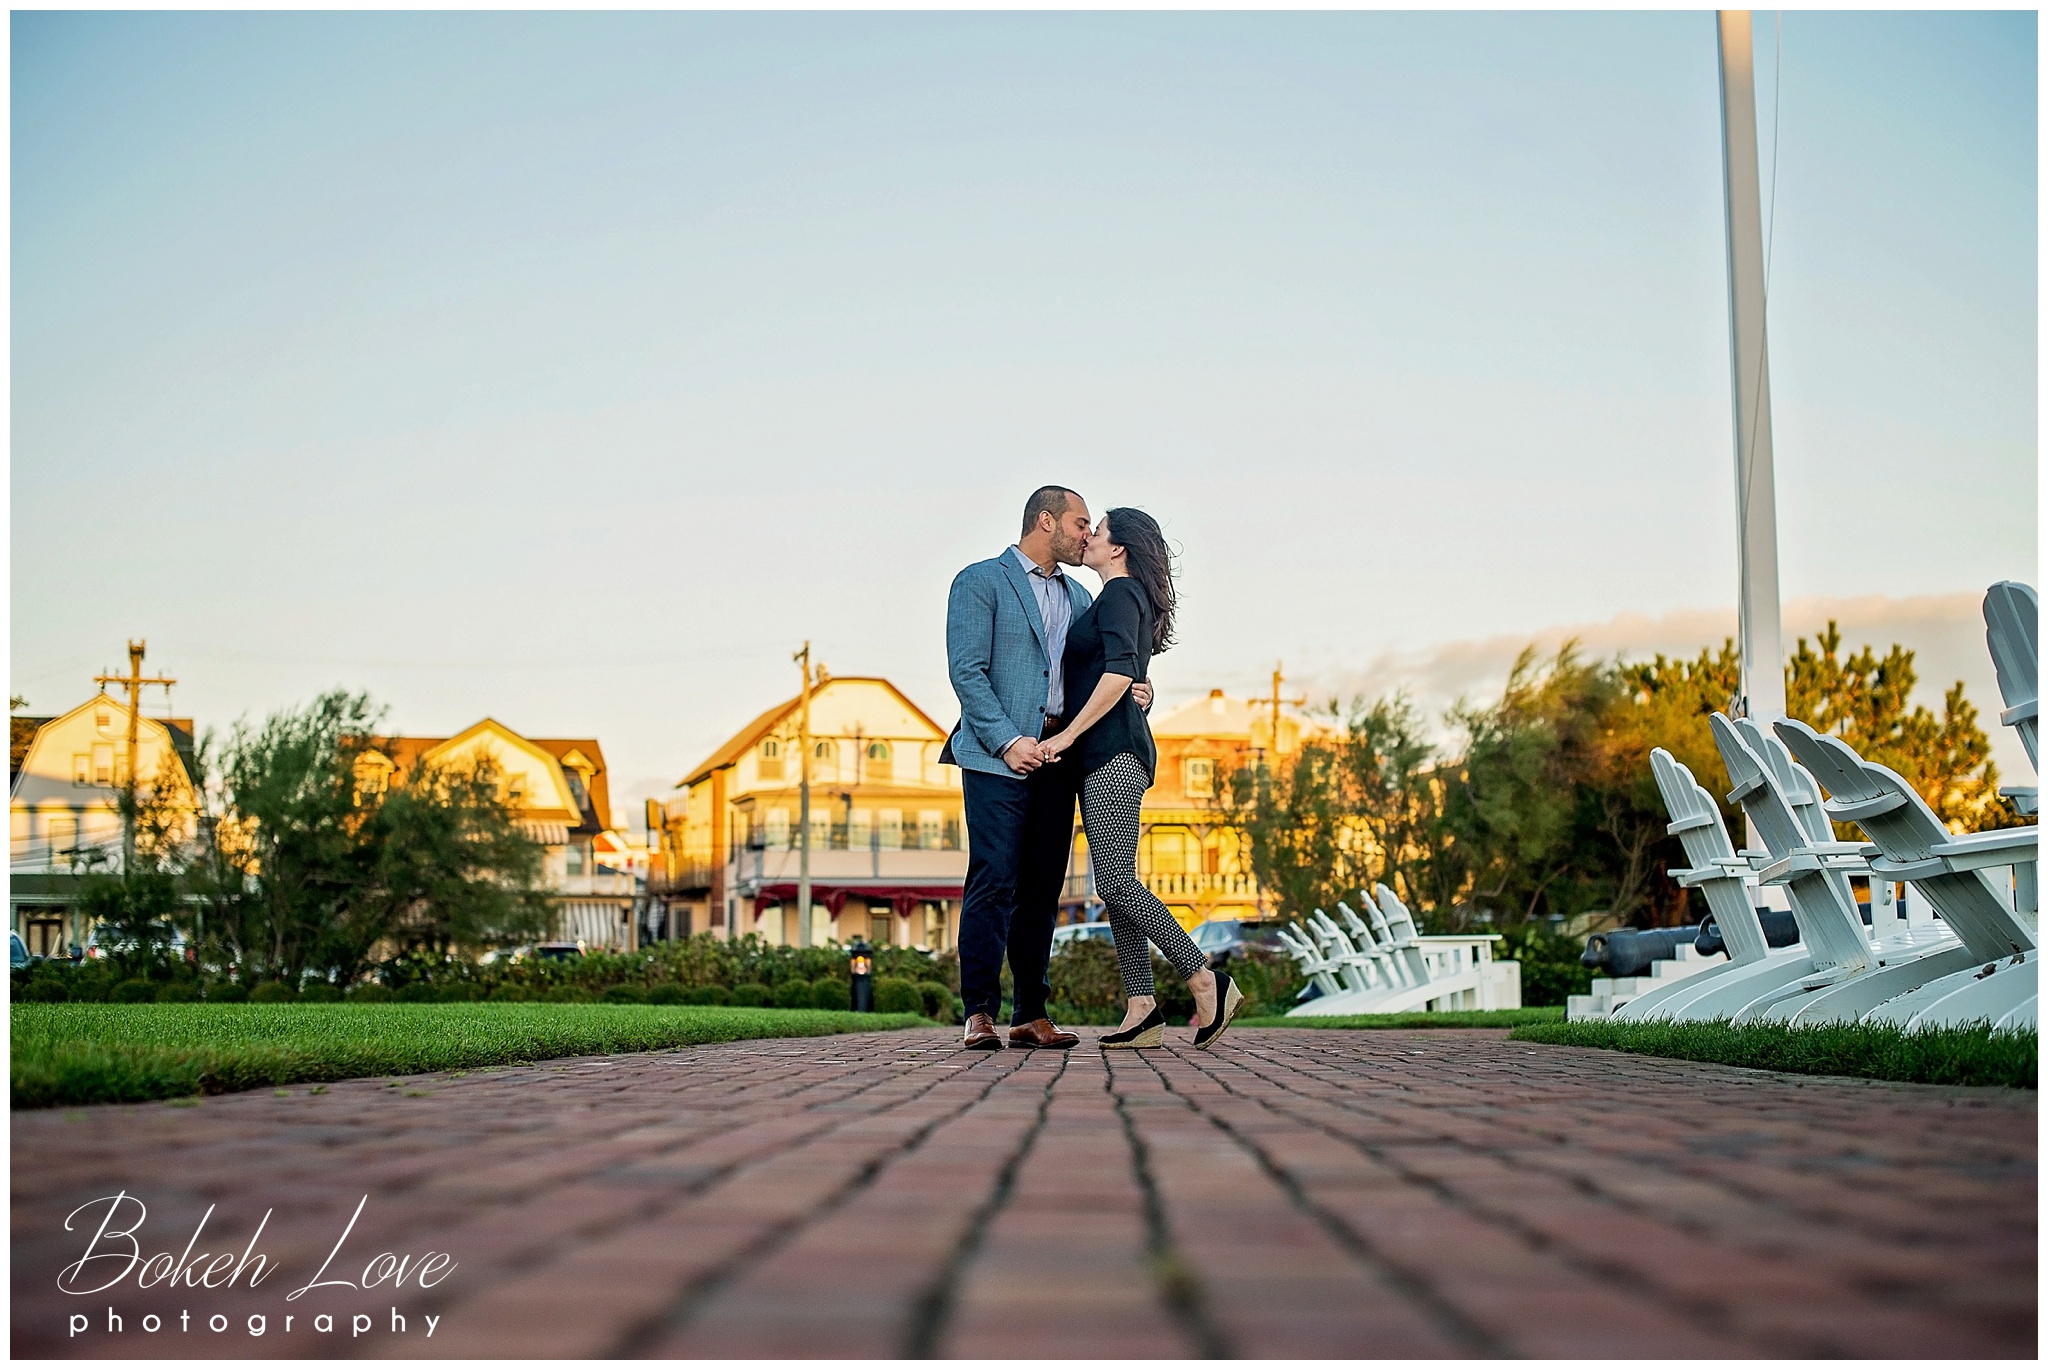 Congress Hall Marriage Proposal Cape May, NJ Bokeh Love Photography